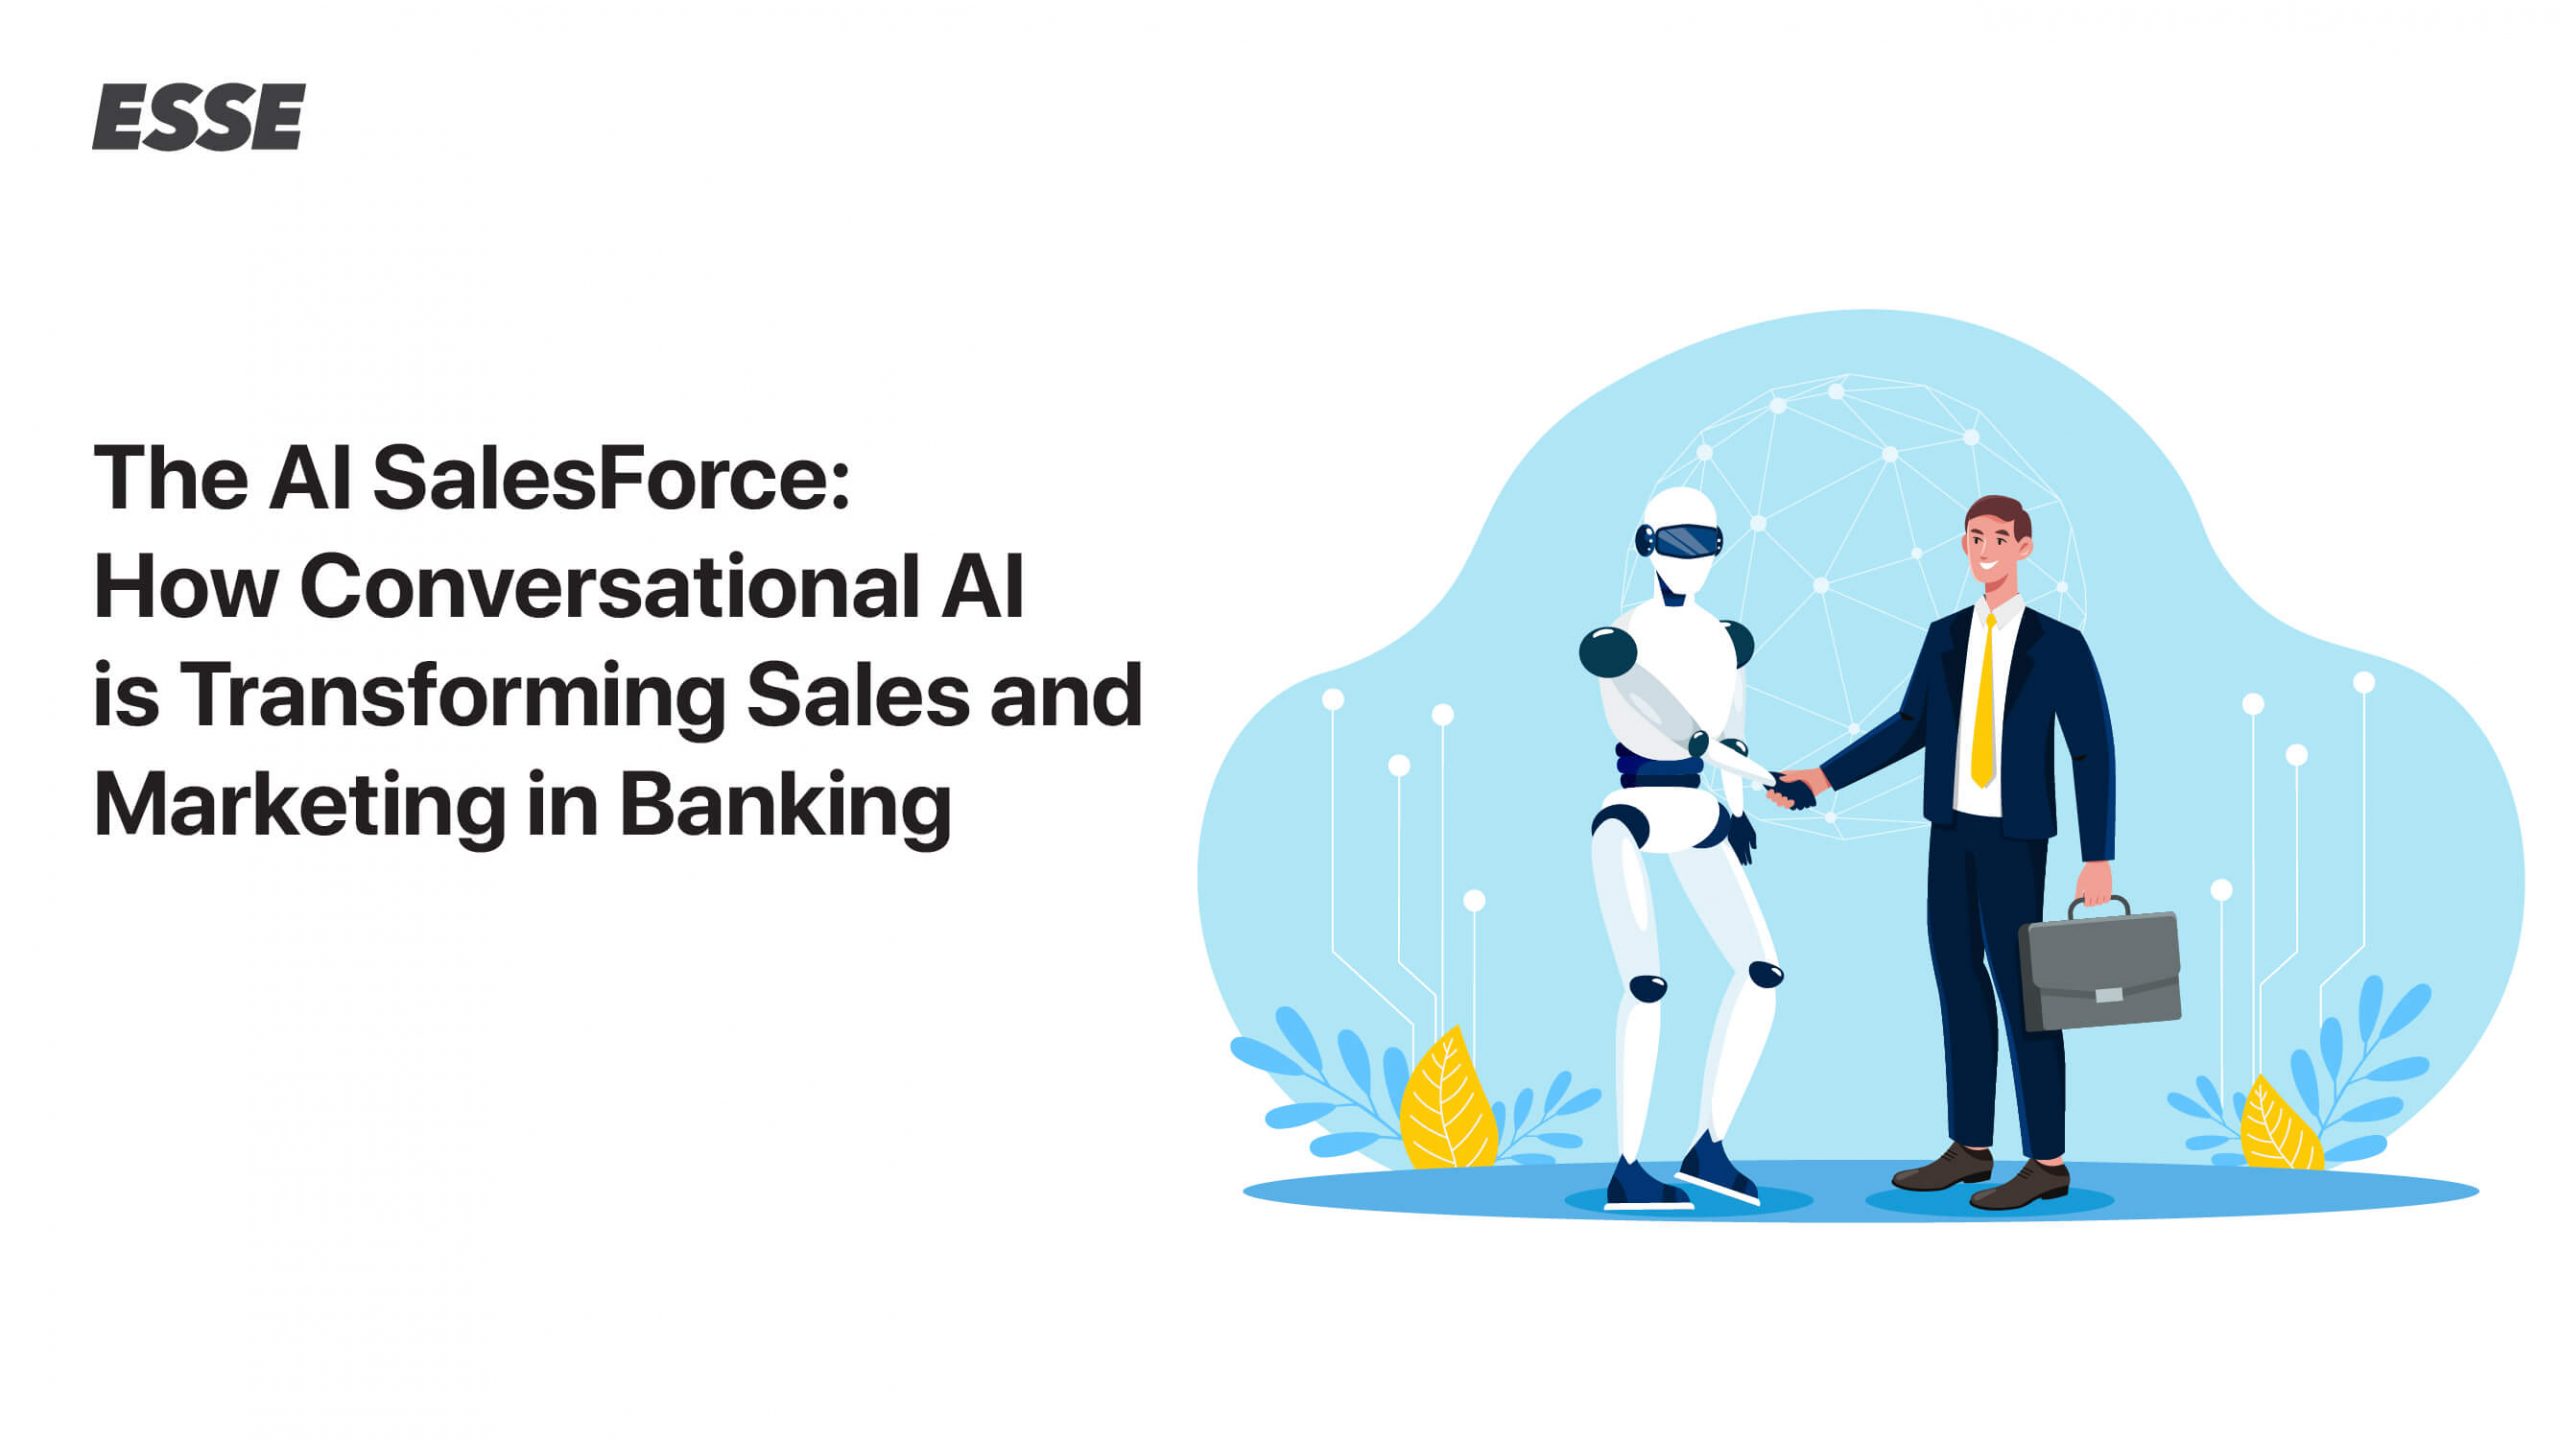 The AI SalesForce: How Conversational AI is Transforming Sales and Marketing in Banking